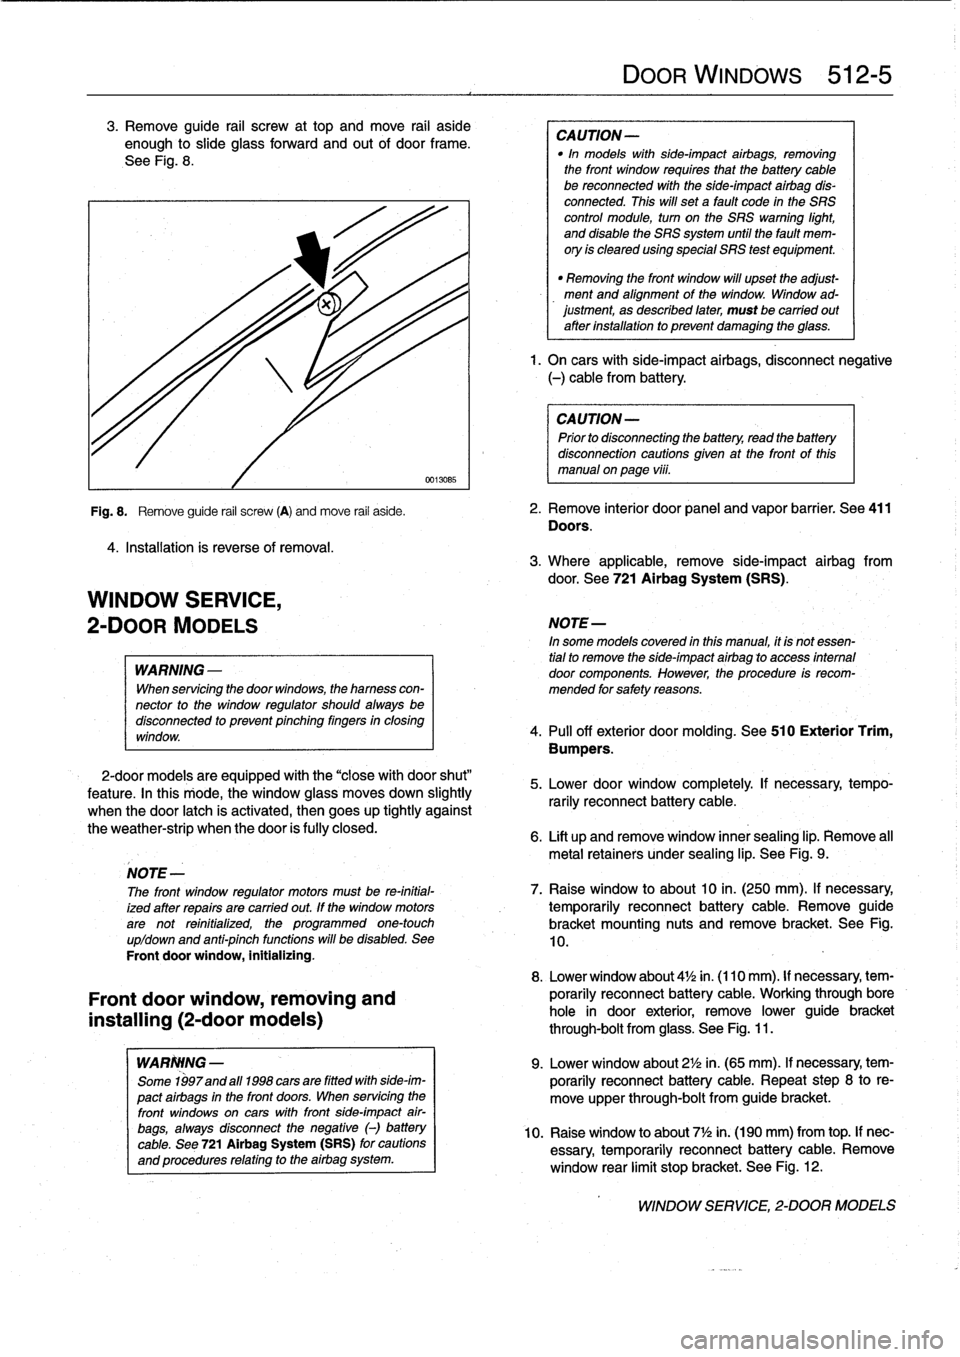 BMW 318i 1996 E36 Workshop Manual 
3
.
Remove
guide
rail
screw
at
top
and
move
rail
aside
enough
to
slide
glass
forward
and
out
of
door
frame
.

See
Fig
.
8
.

4
.
Installation
is
reverse
of
removal
.

WINDOW
SERVICE,

2-DOOR
MODELS

